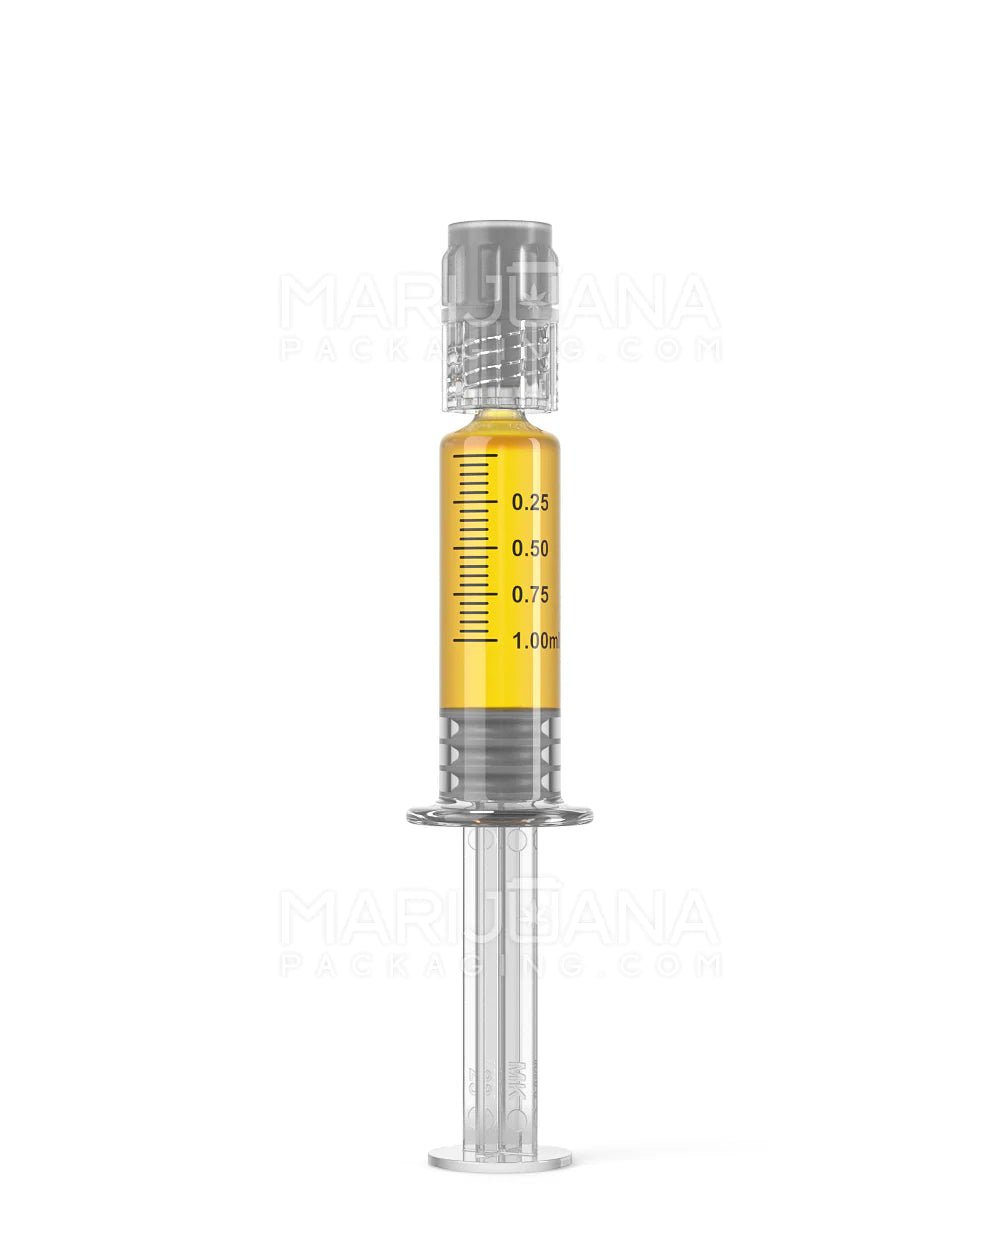 The 1ml Glass Syringe: A Dual Champion for Storing and Using Cannabis Extracts - Oil Slick